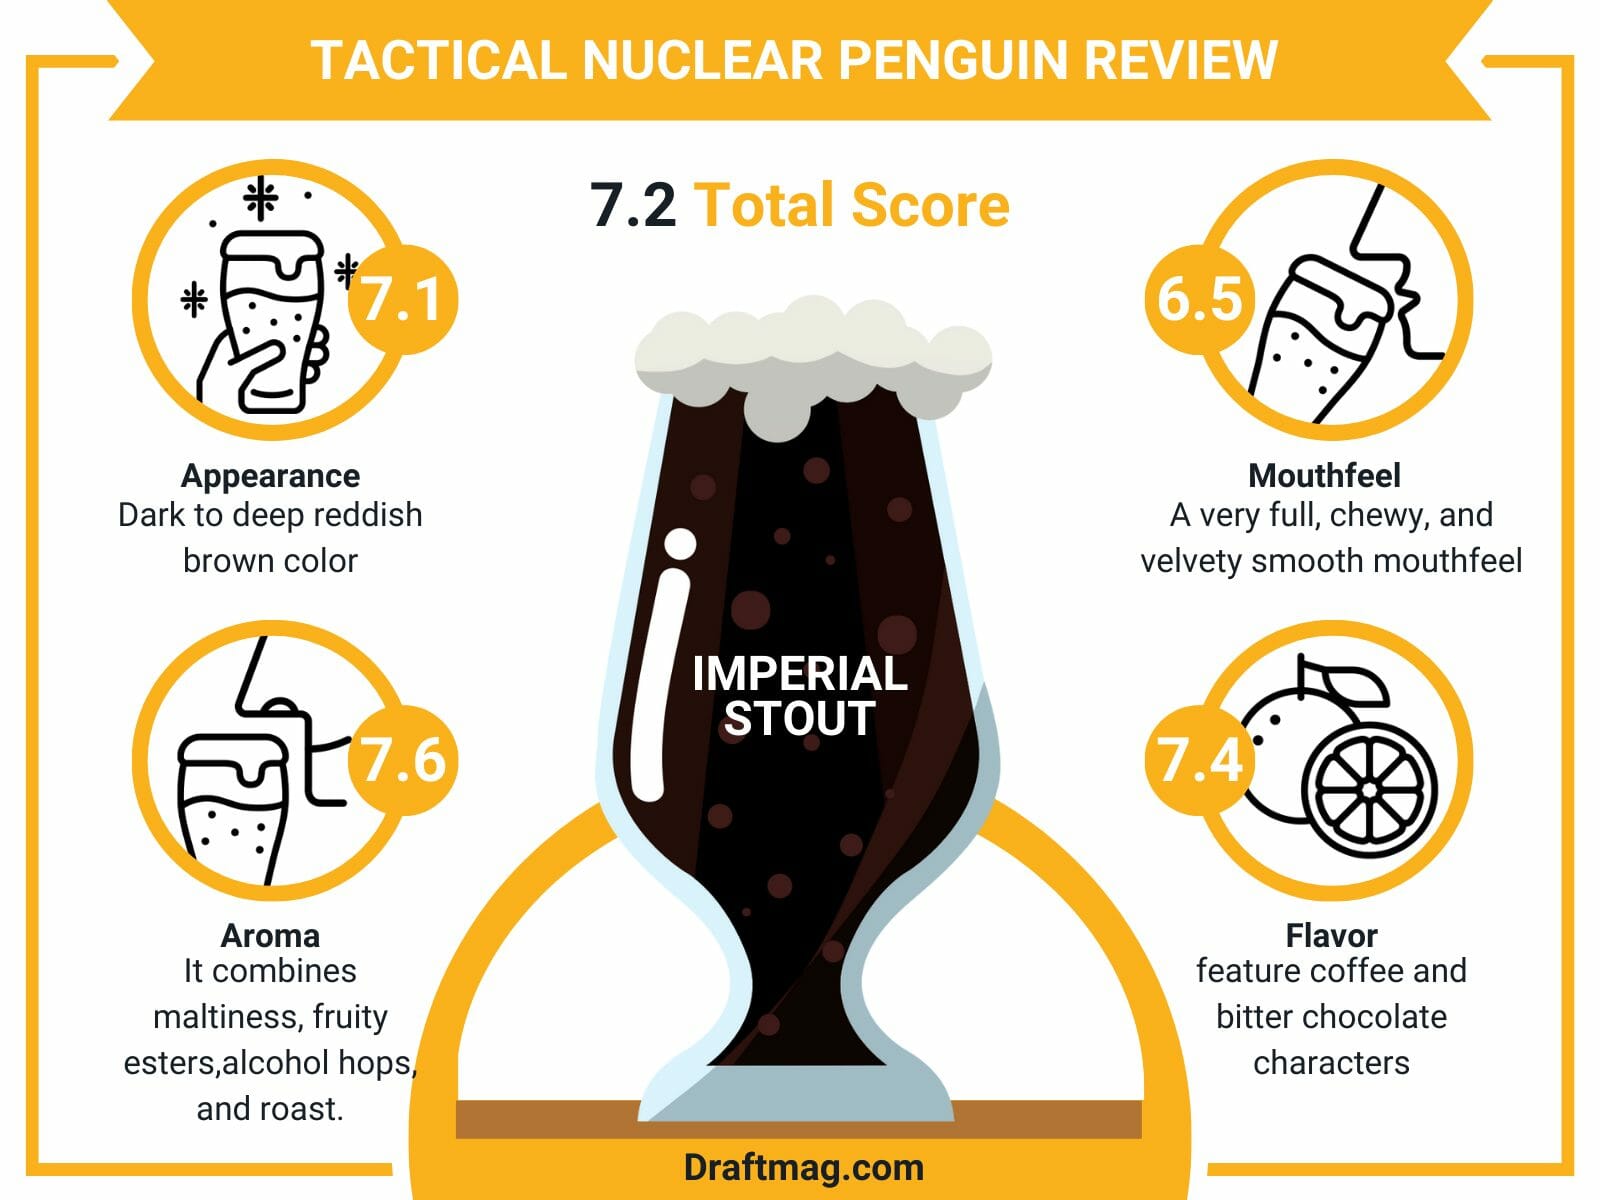 Tactical nuclear penguin review infographic